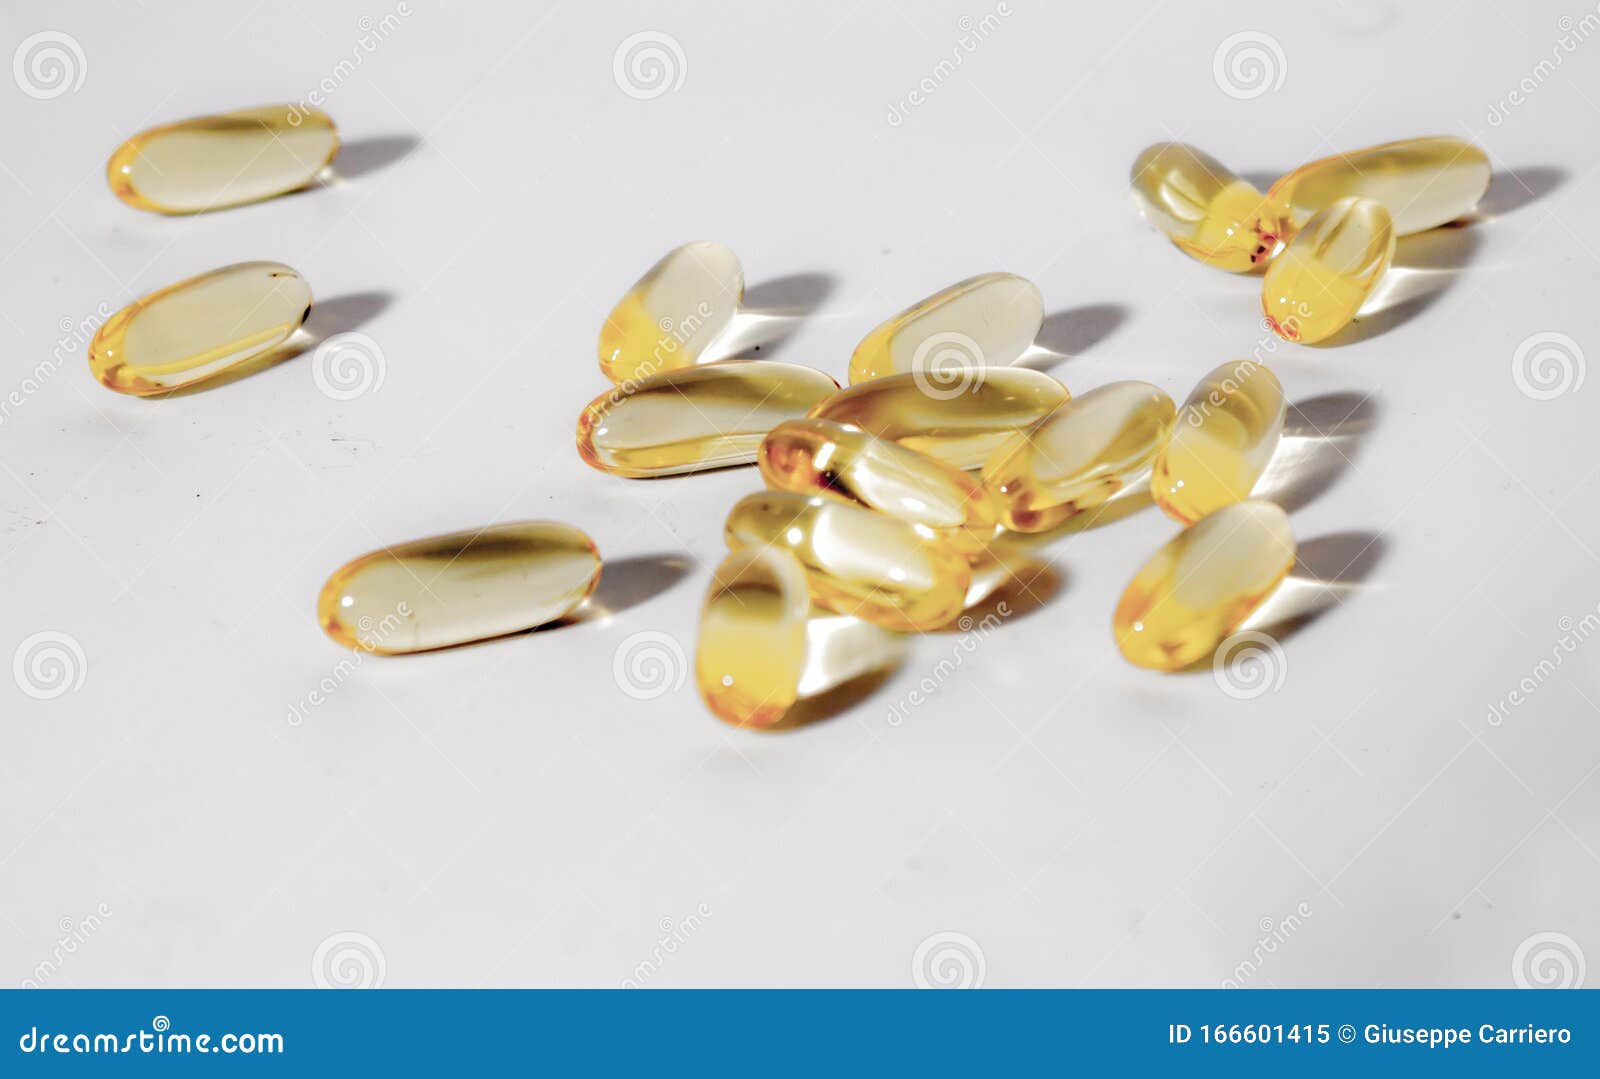 gelatin capsules containing omega 3 derived from fish products.